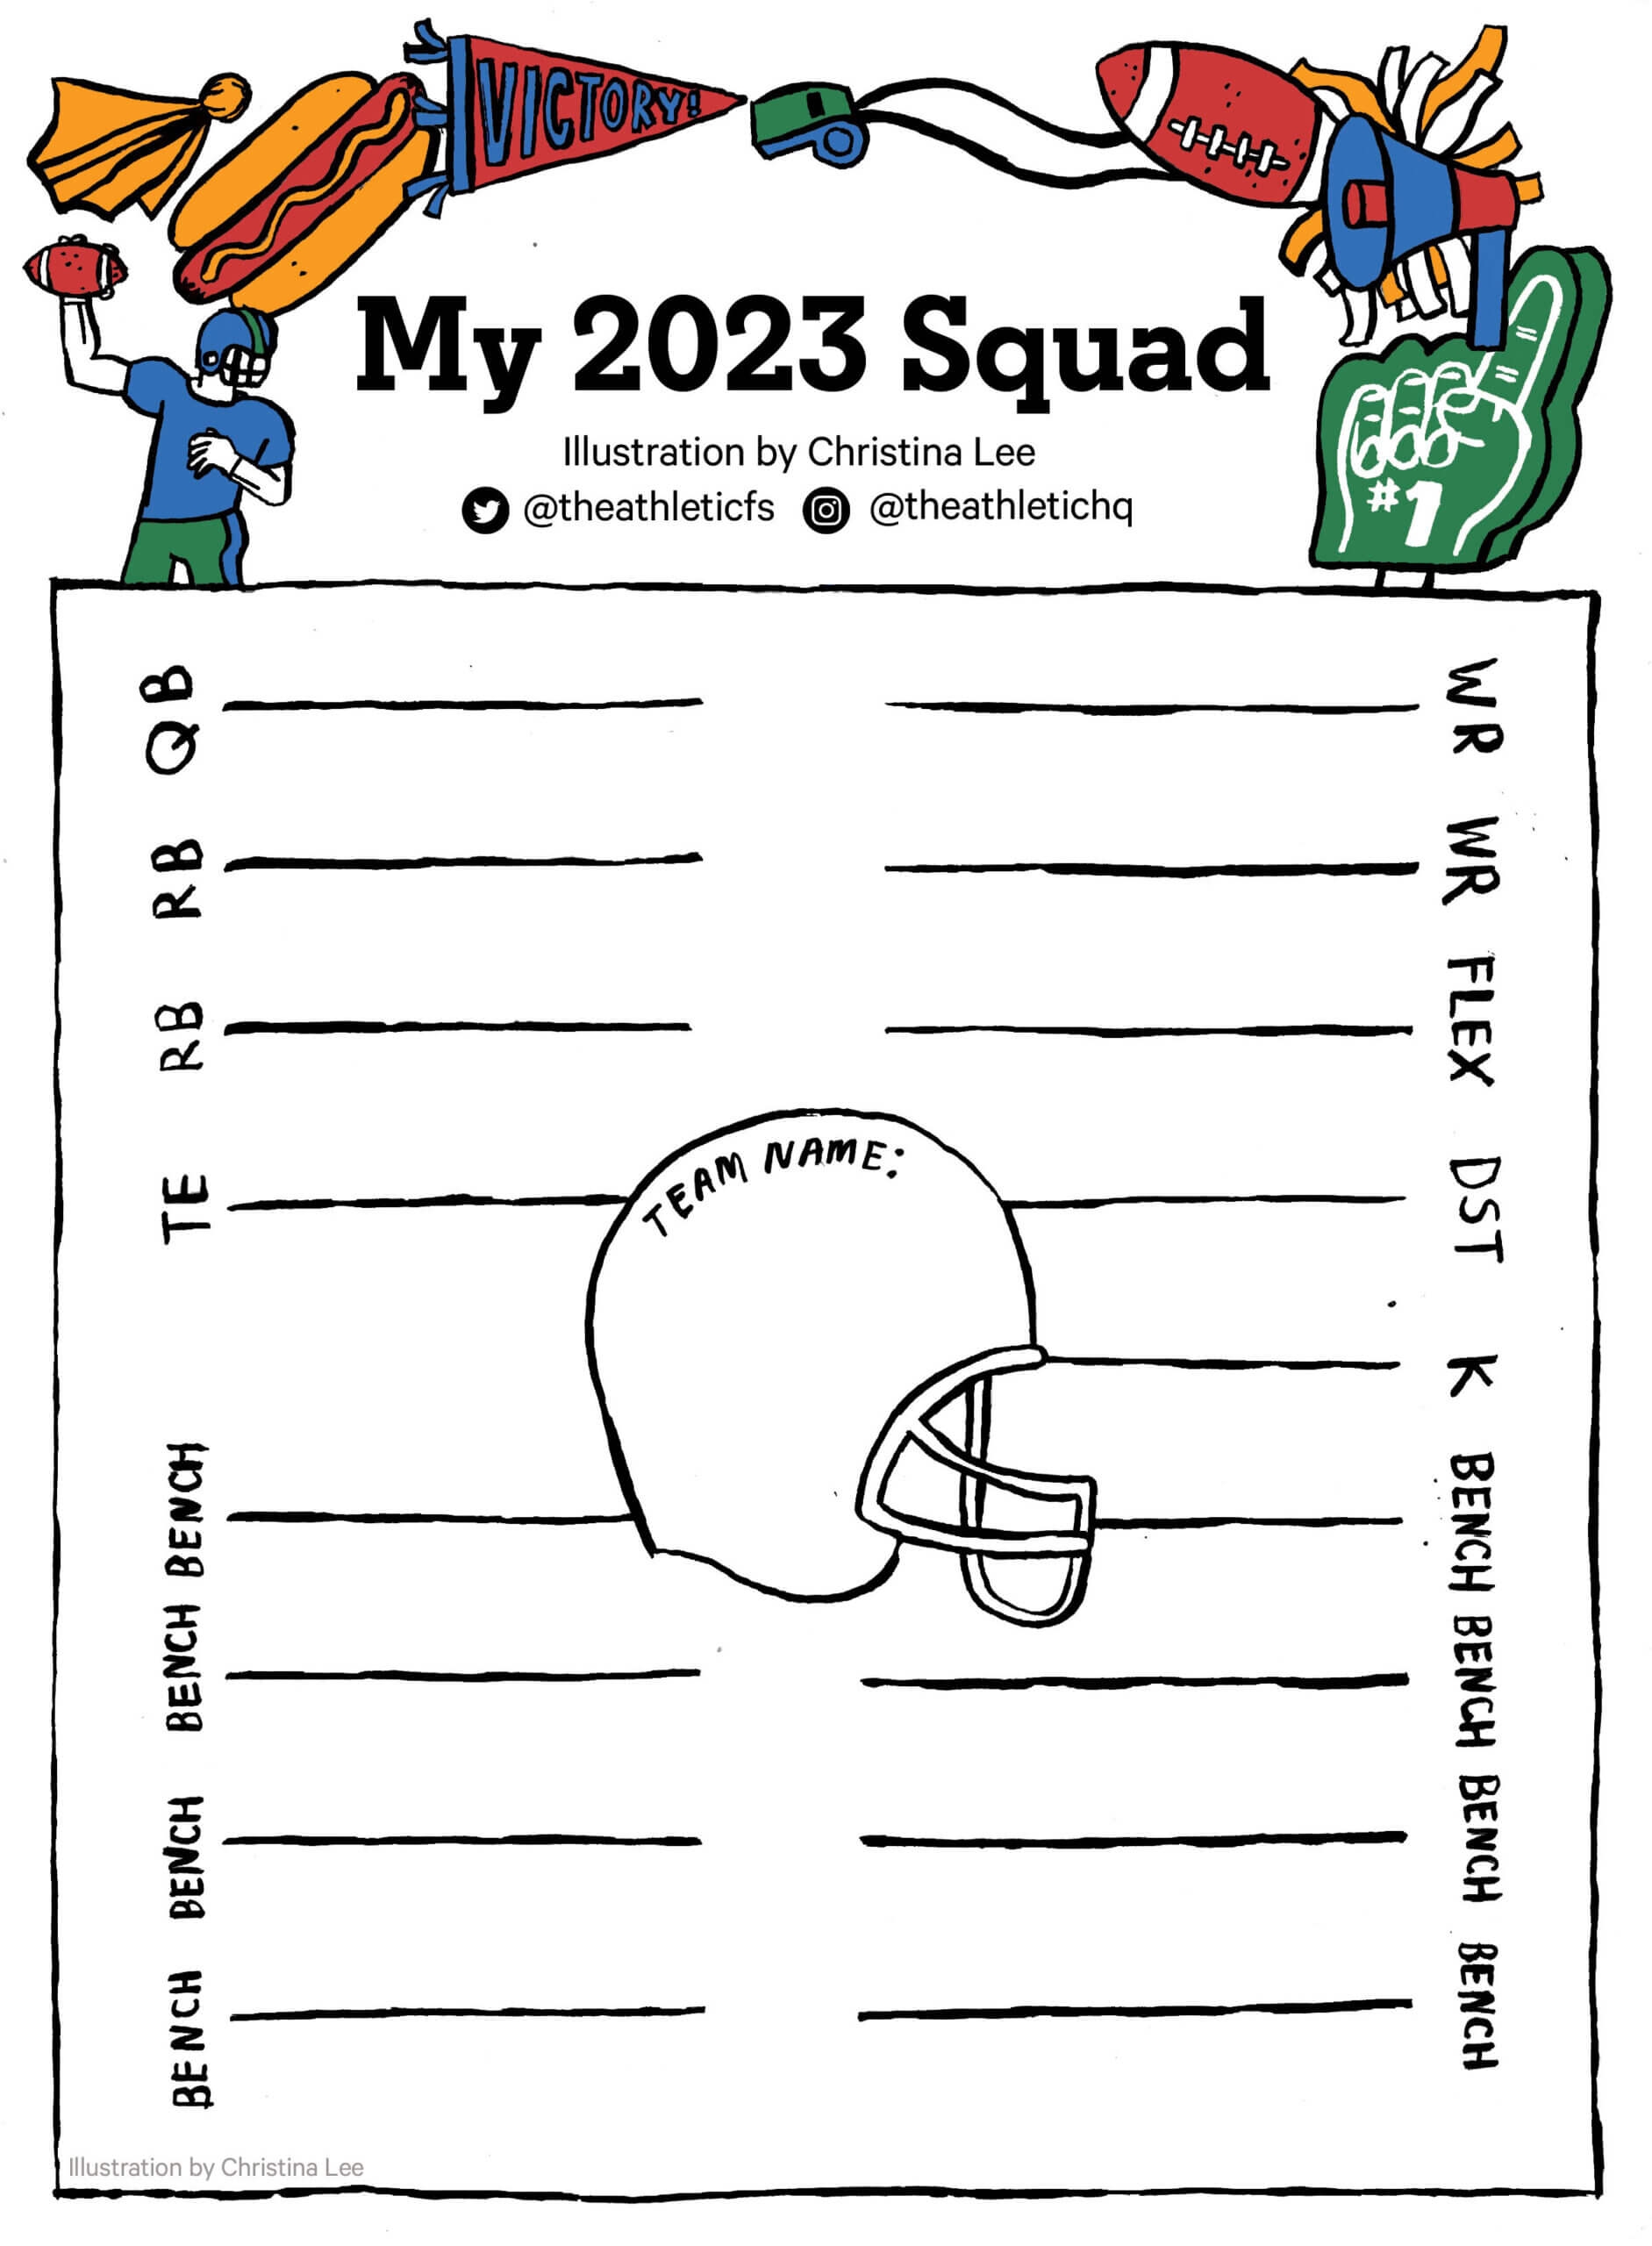 2023 Fantasy Football Guide Express What To Do If You Draft Tonight And Forgot and Don t Know What To Do The Athletic - Fantasy Football Draft Sheets Printable Free